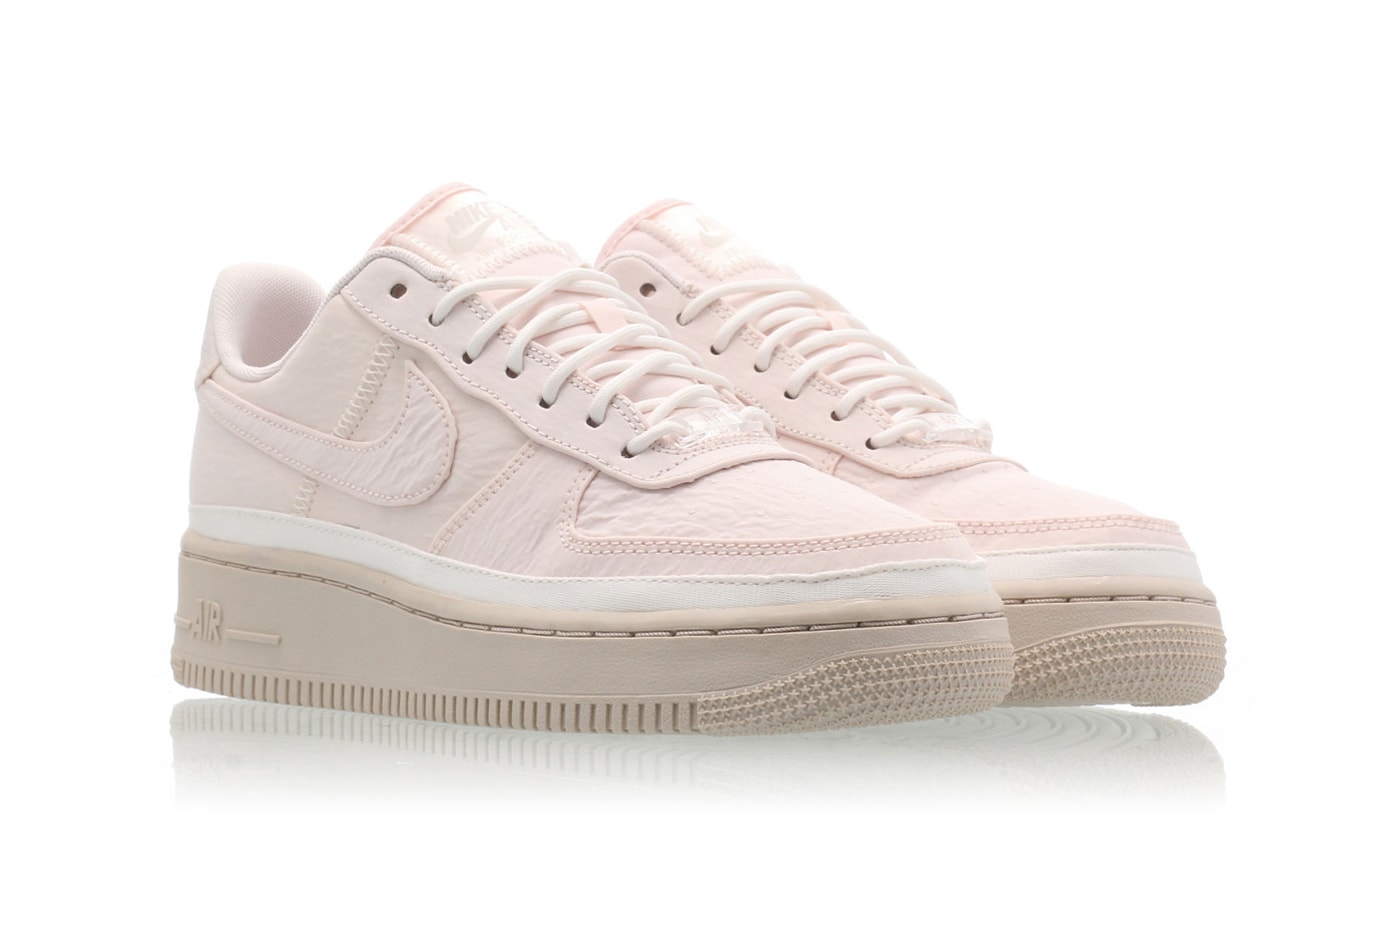 Nike Air Force 1 '07 SE Light Soft Pink Sneakers Trainers Beige Sole